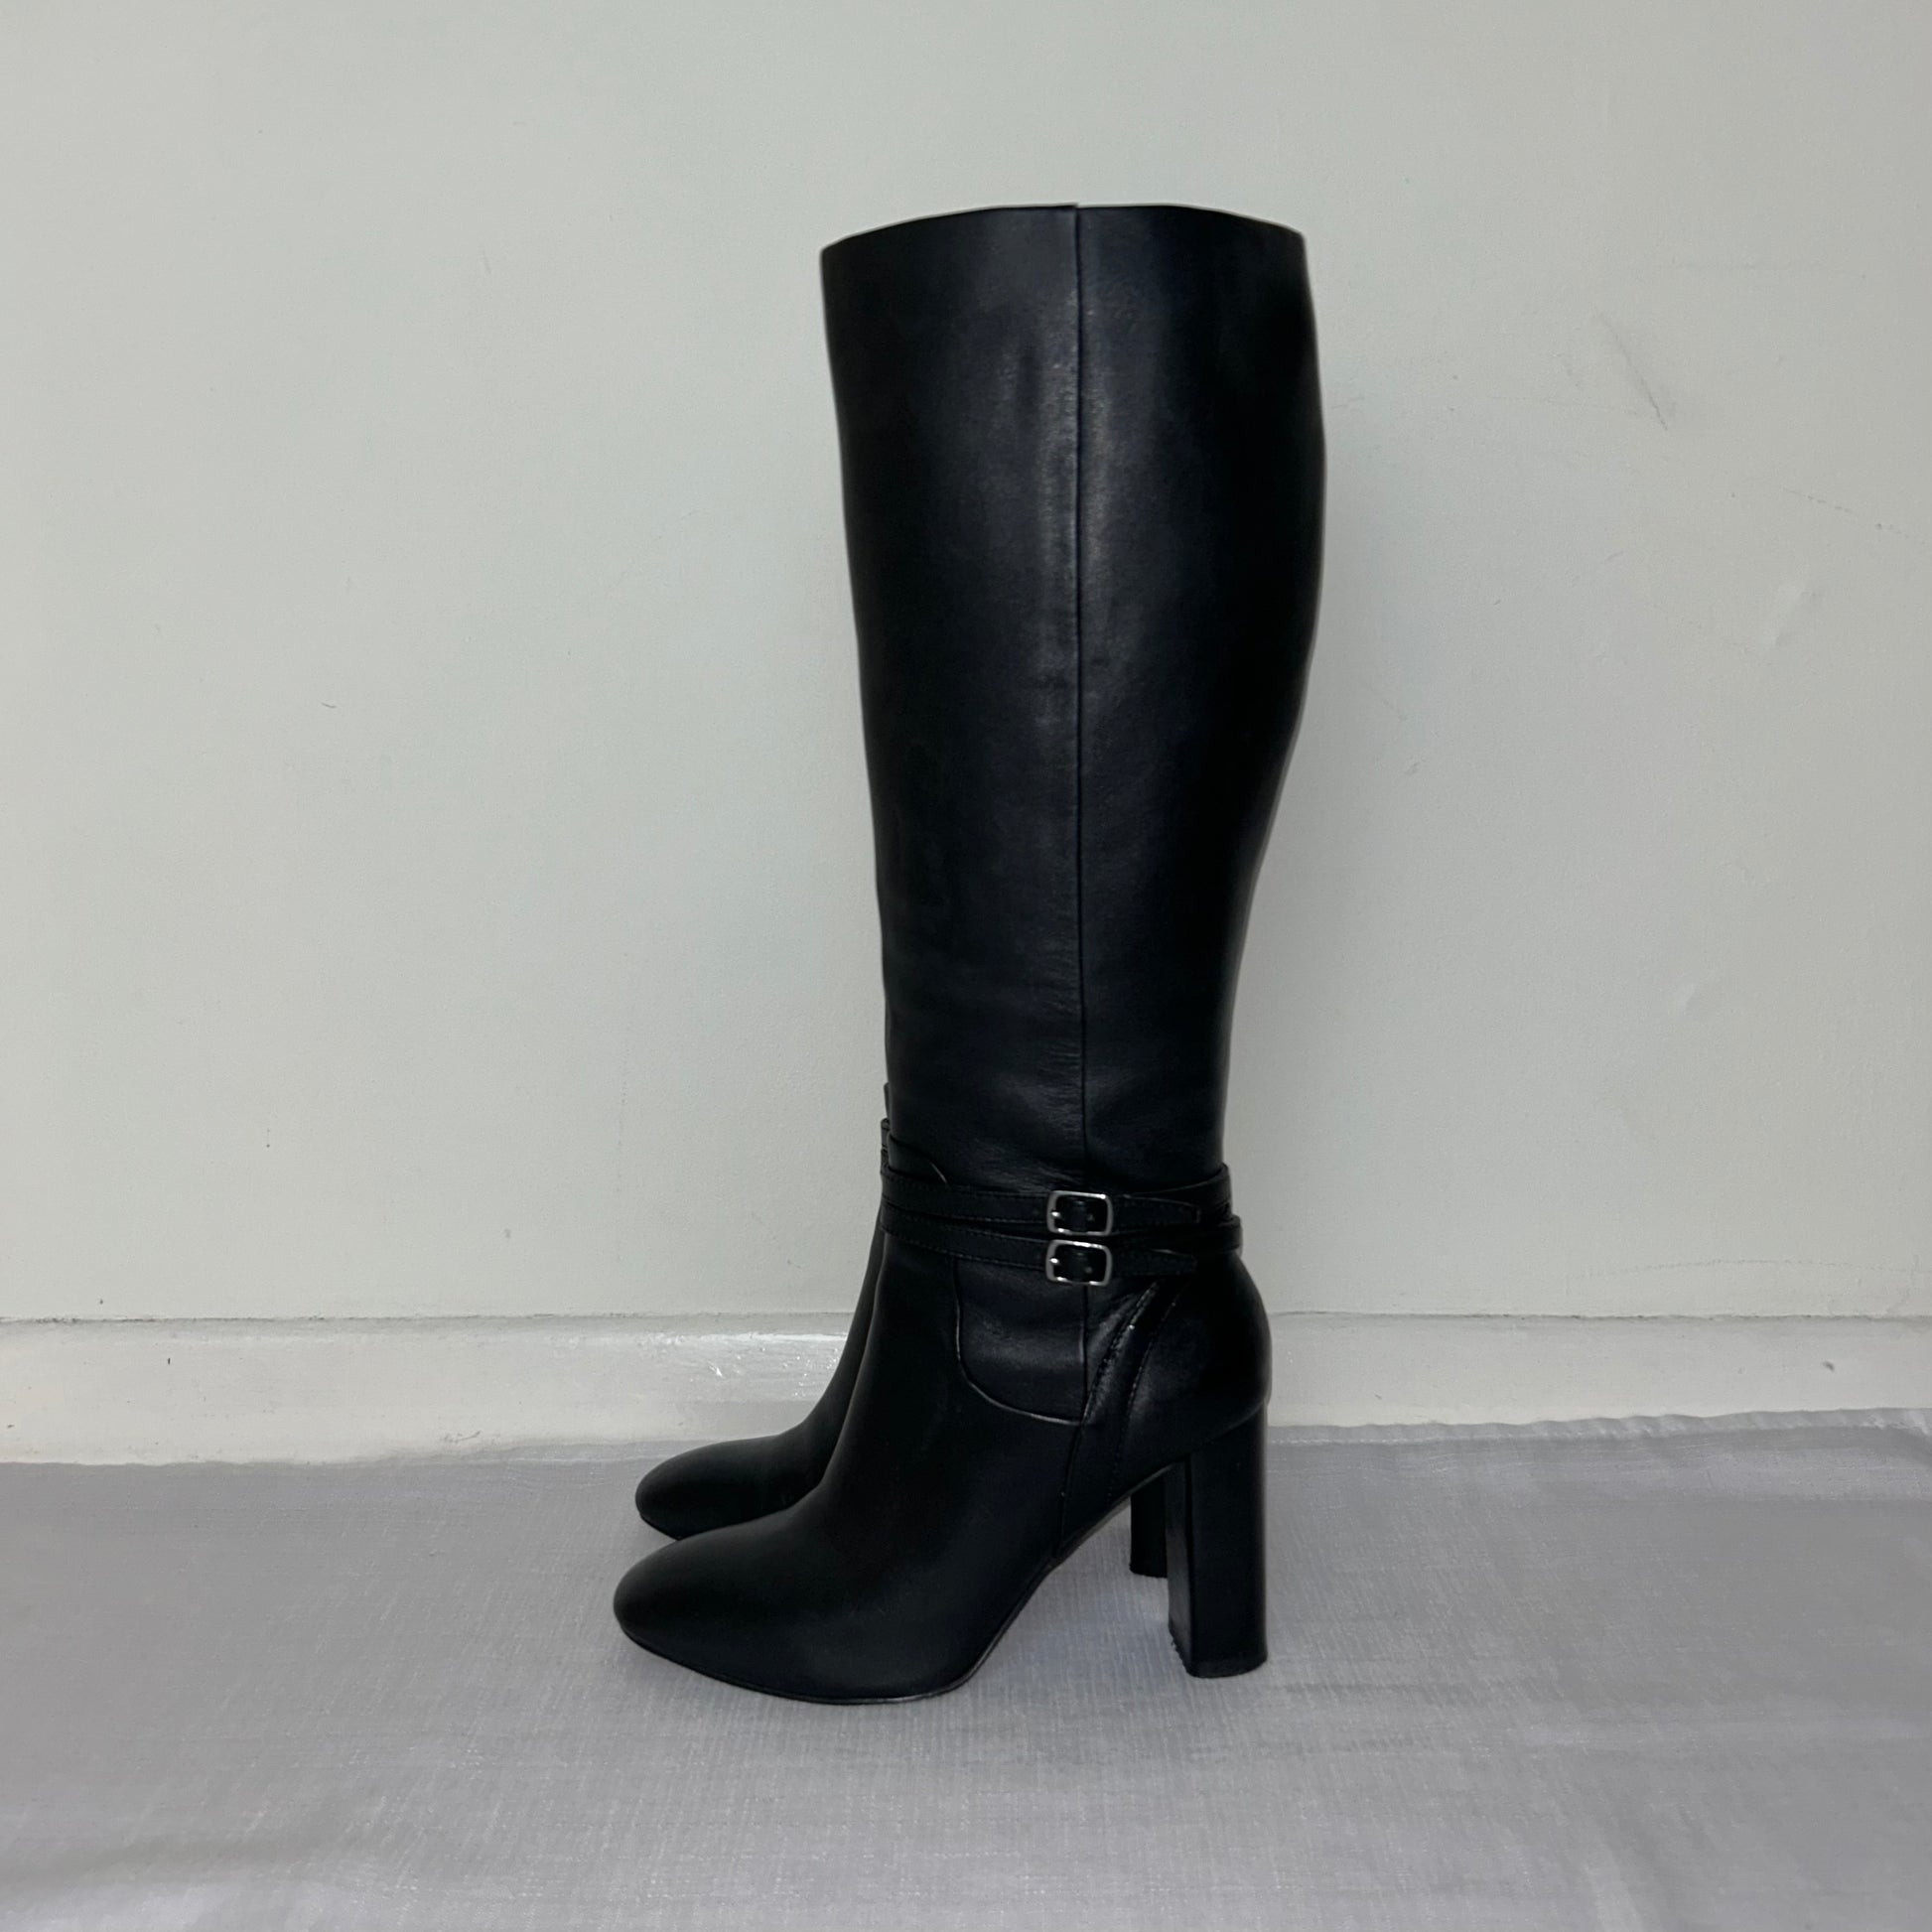 black knee high boots with double silver buckle shown on a white background